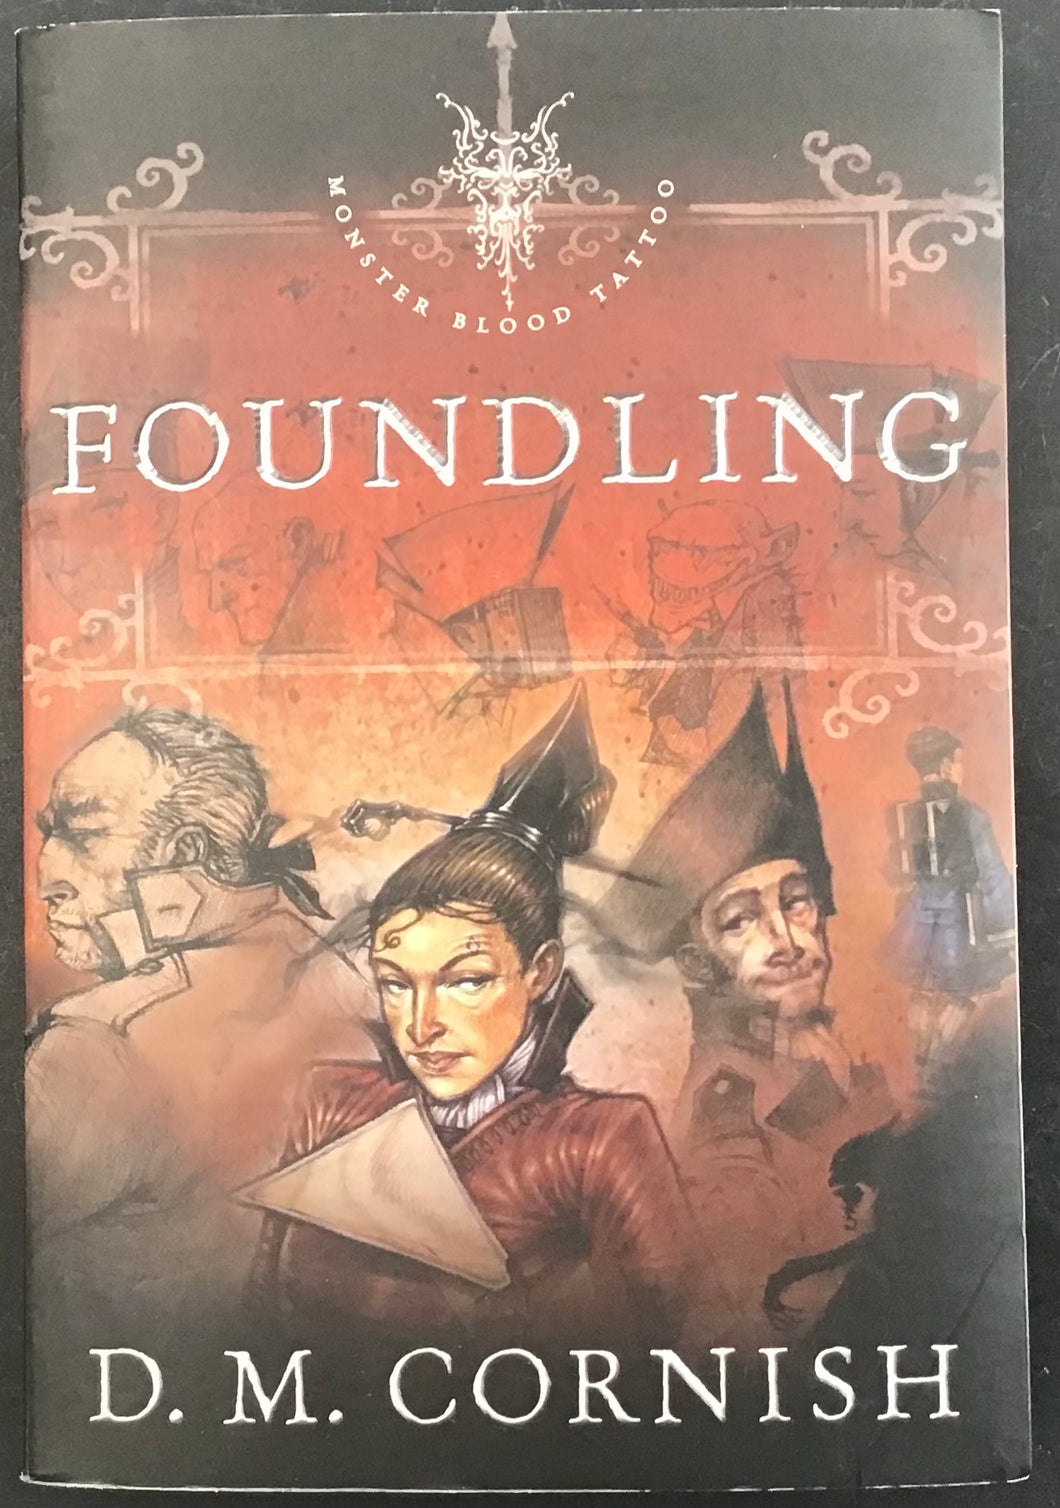 Foundling, by D.M. Cornish